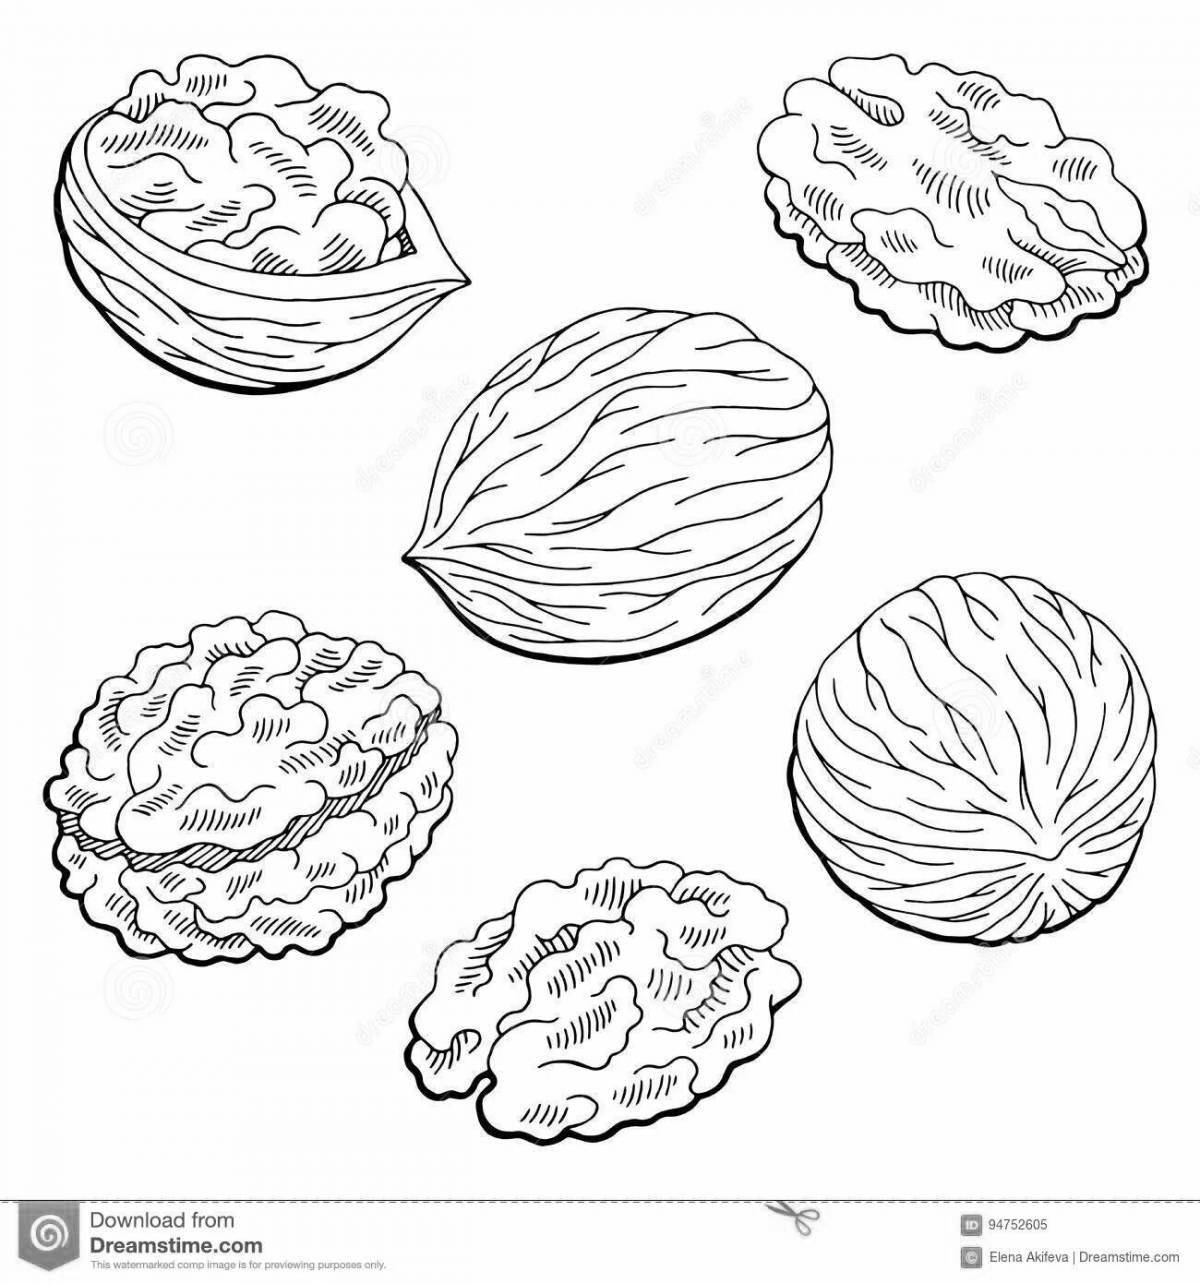 Living walnut coloring page for kids